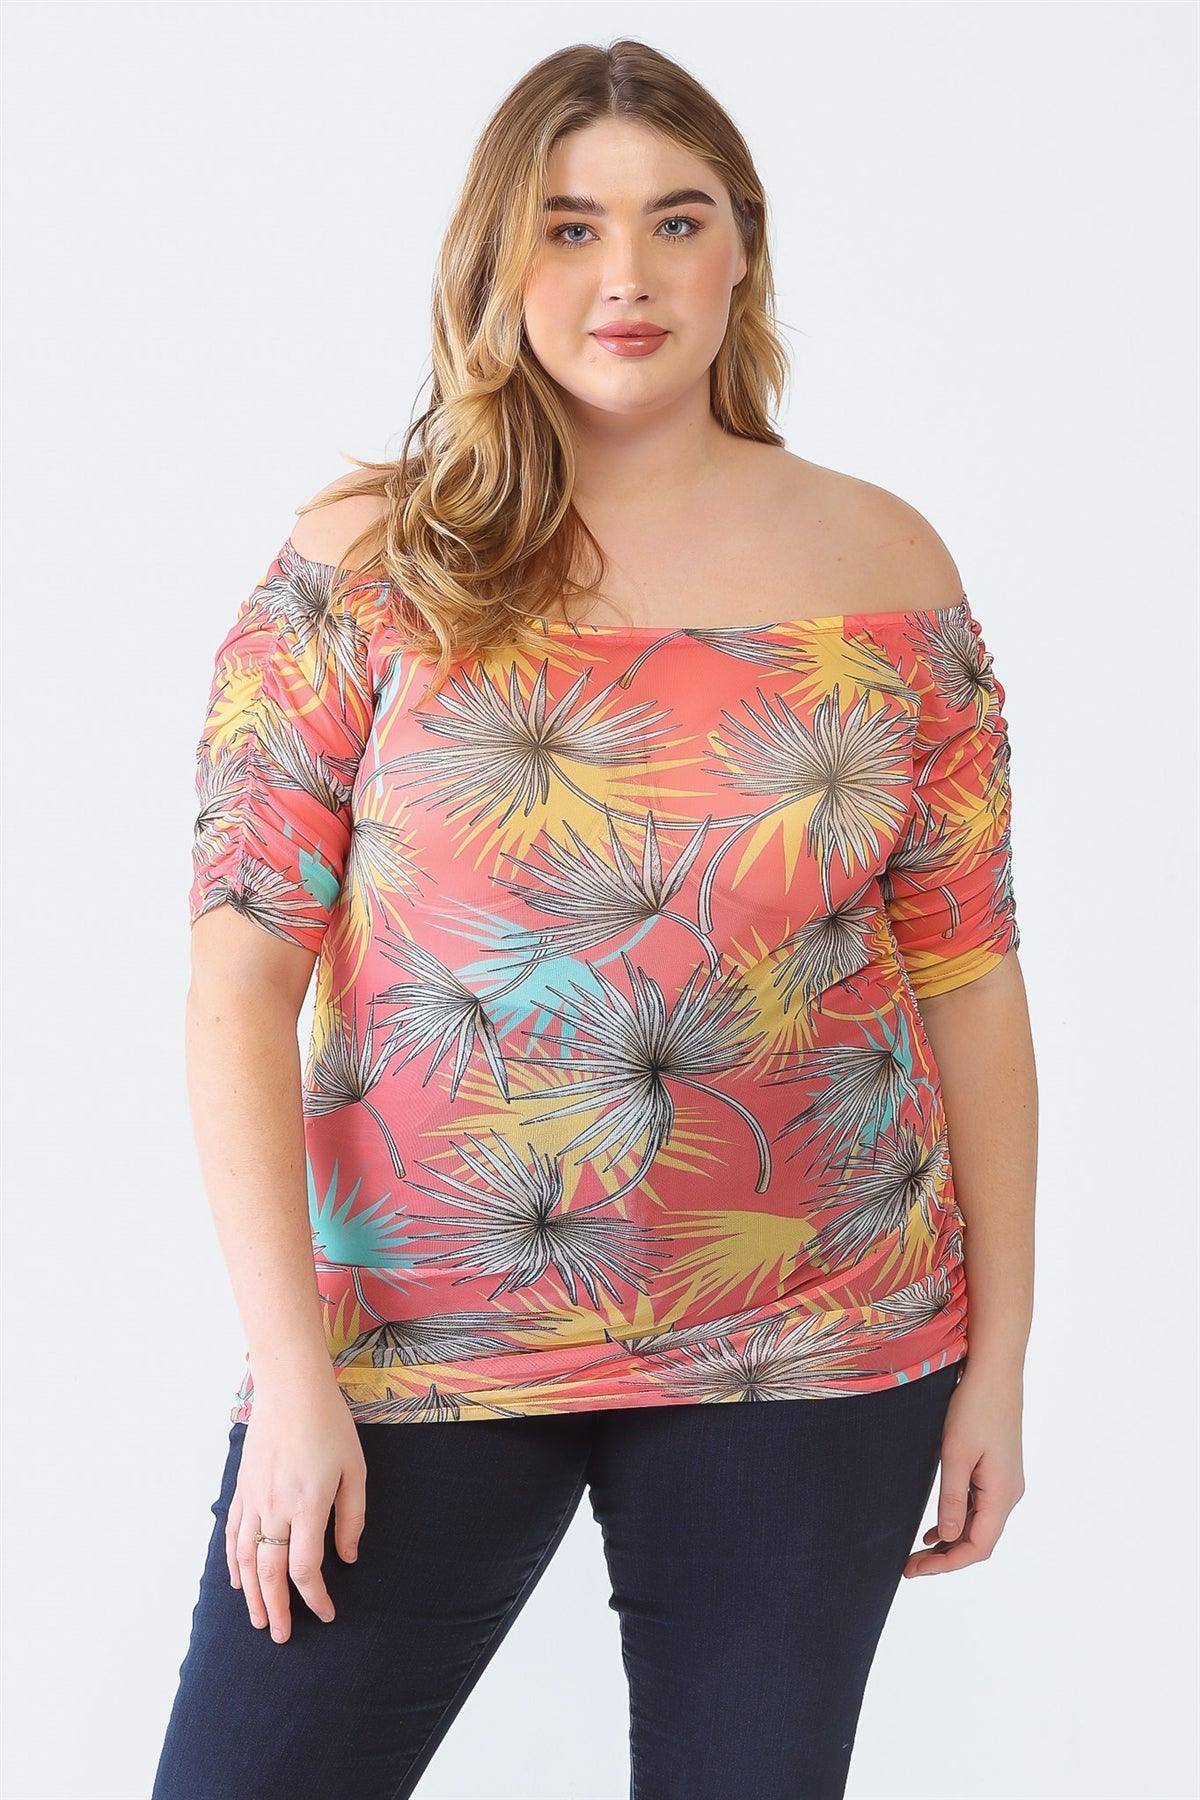 Junior Plus Coral Palm Leaves Print Sheer Mesh Ruched Off-The-Shoulder Top /1-1-1